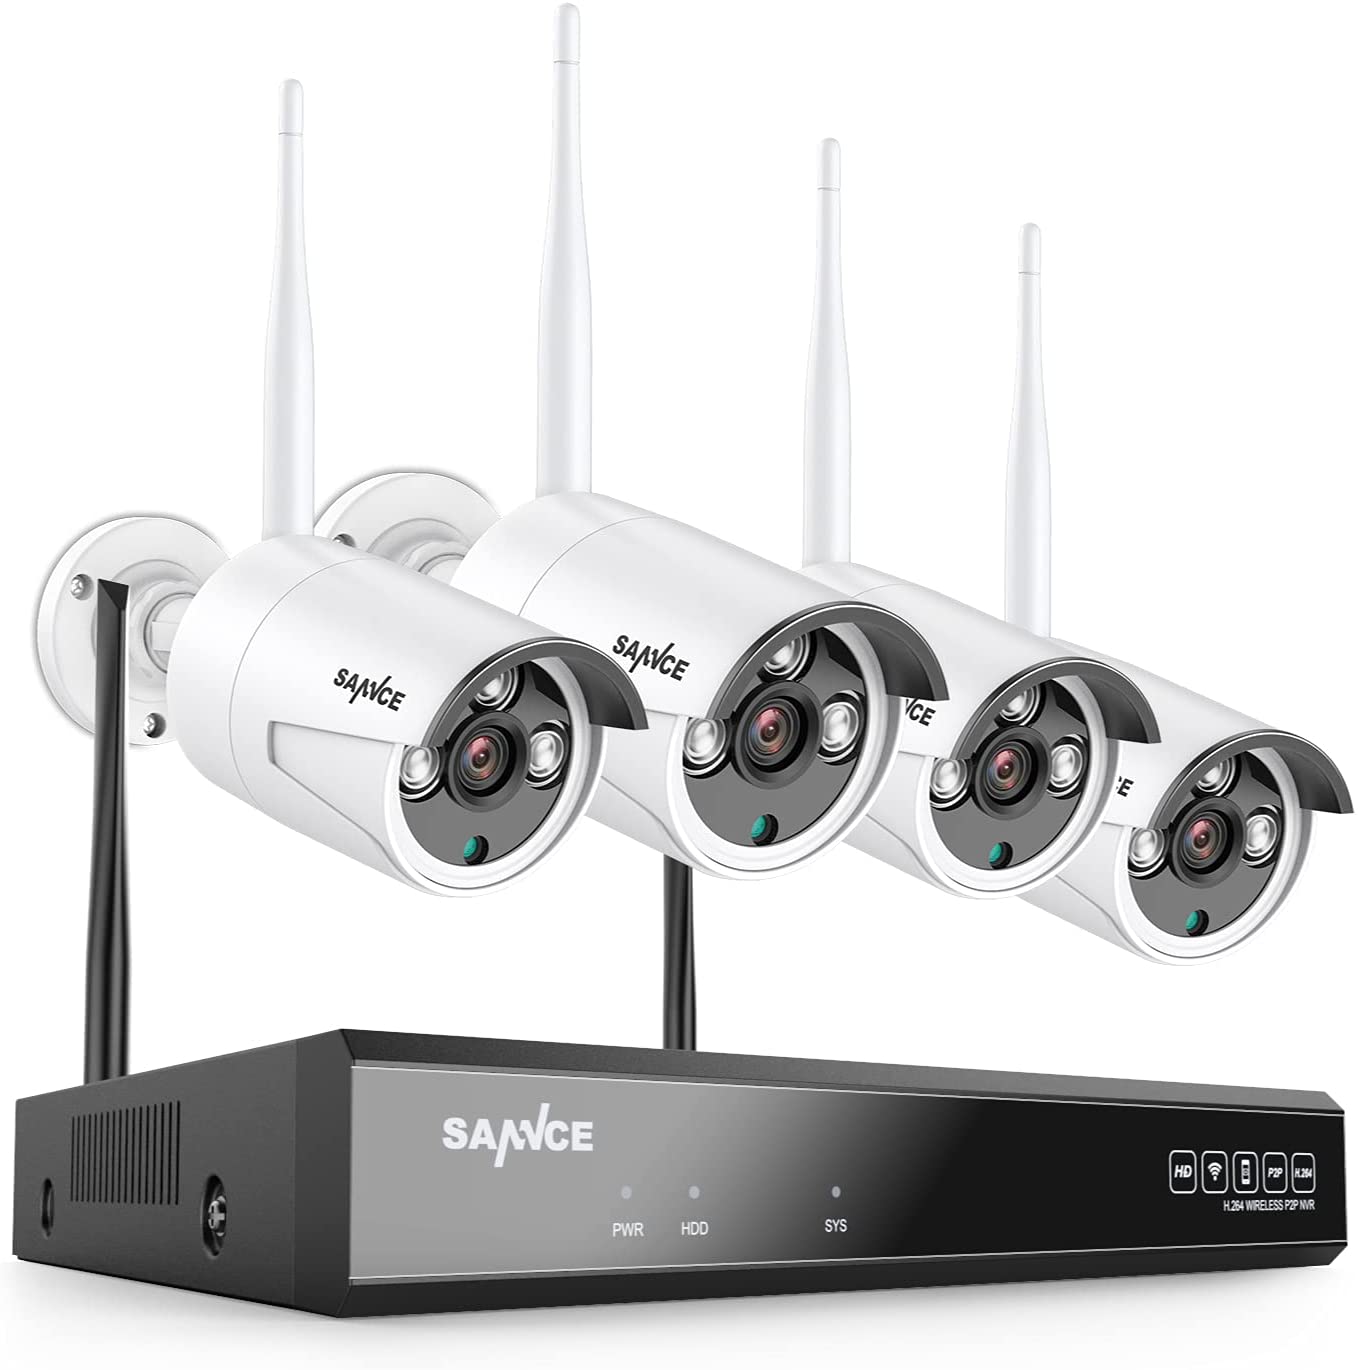 SANNCE 8 Channel 5MP Super HD Wireless NVR System with 3MP Outdoor WiFi Cameras, Built-in Mic AI Human Detection, Work with Alexa, FS, $139.99,